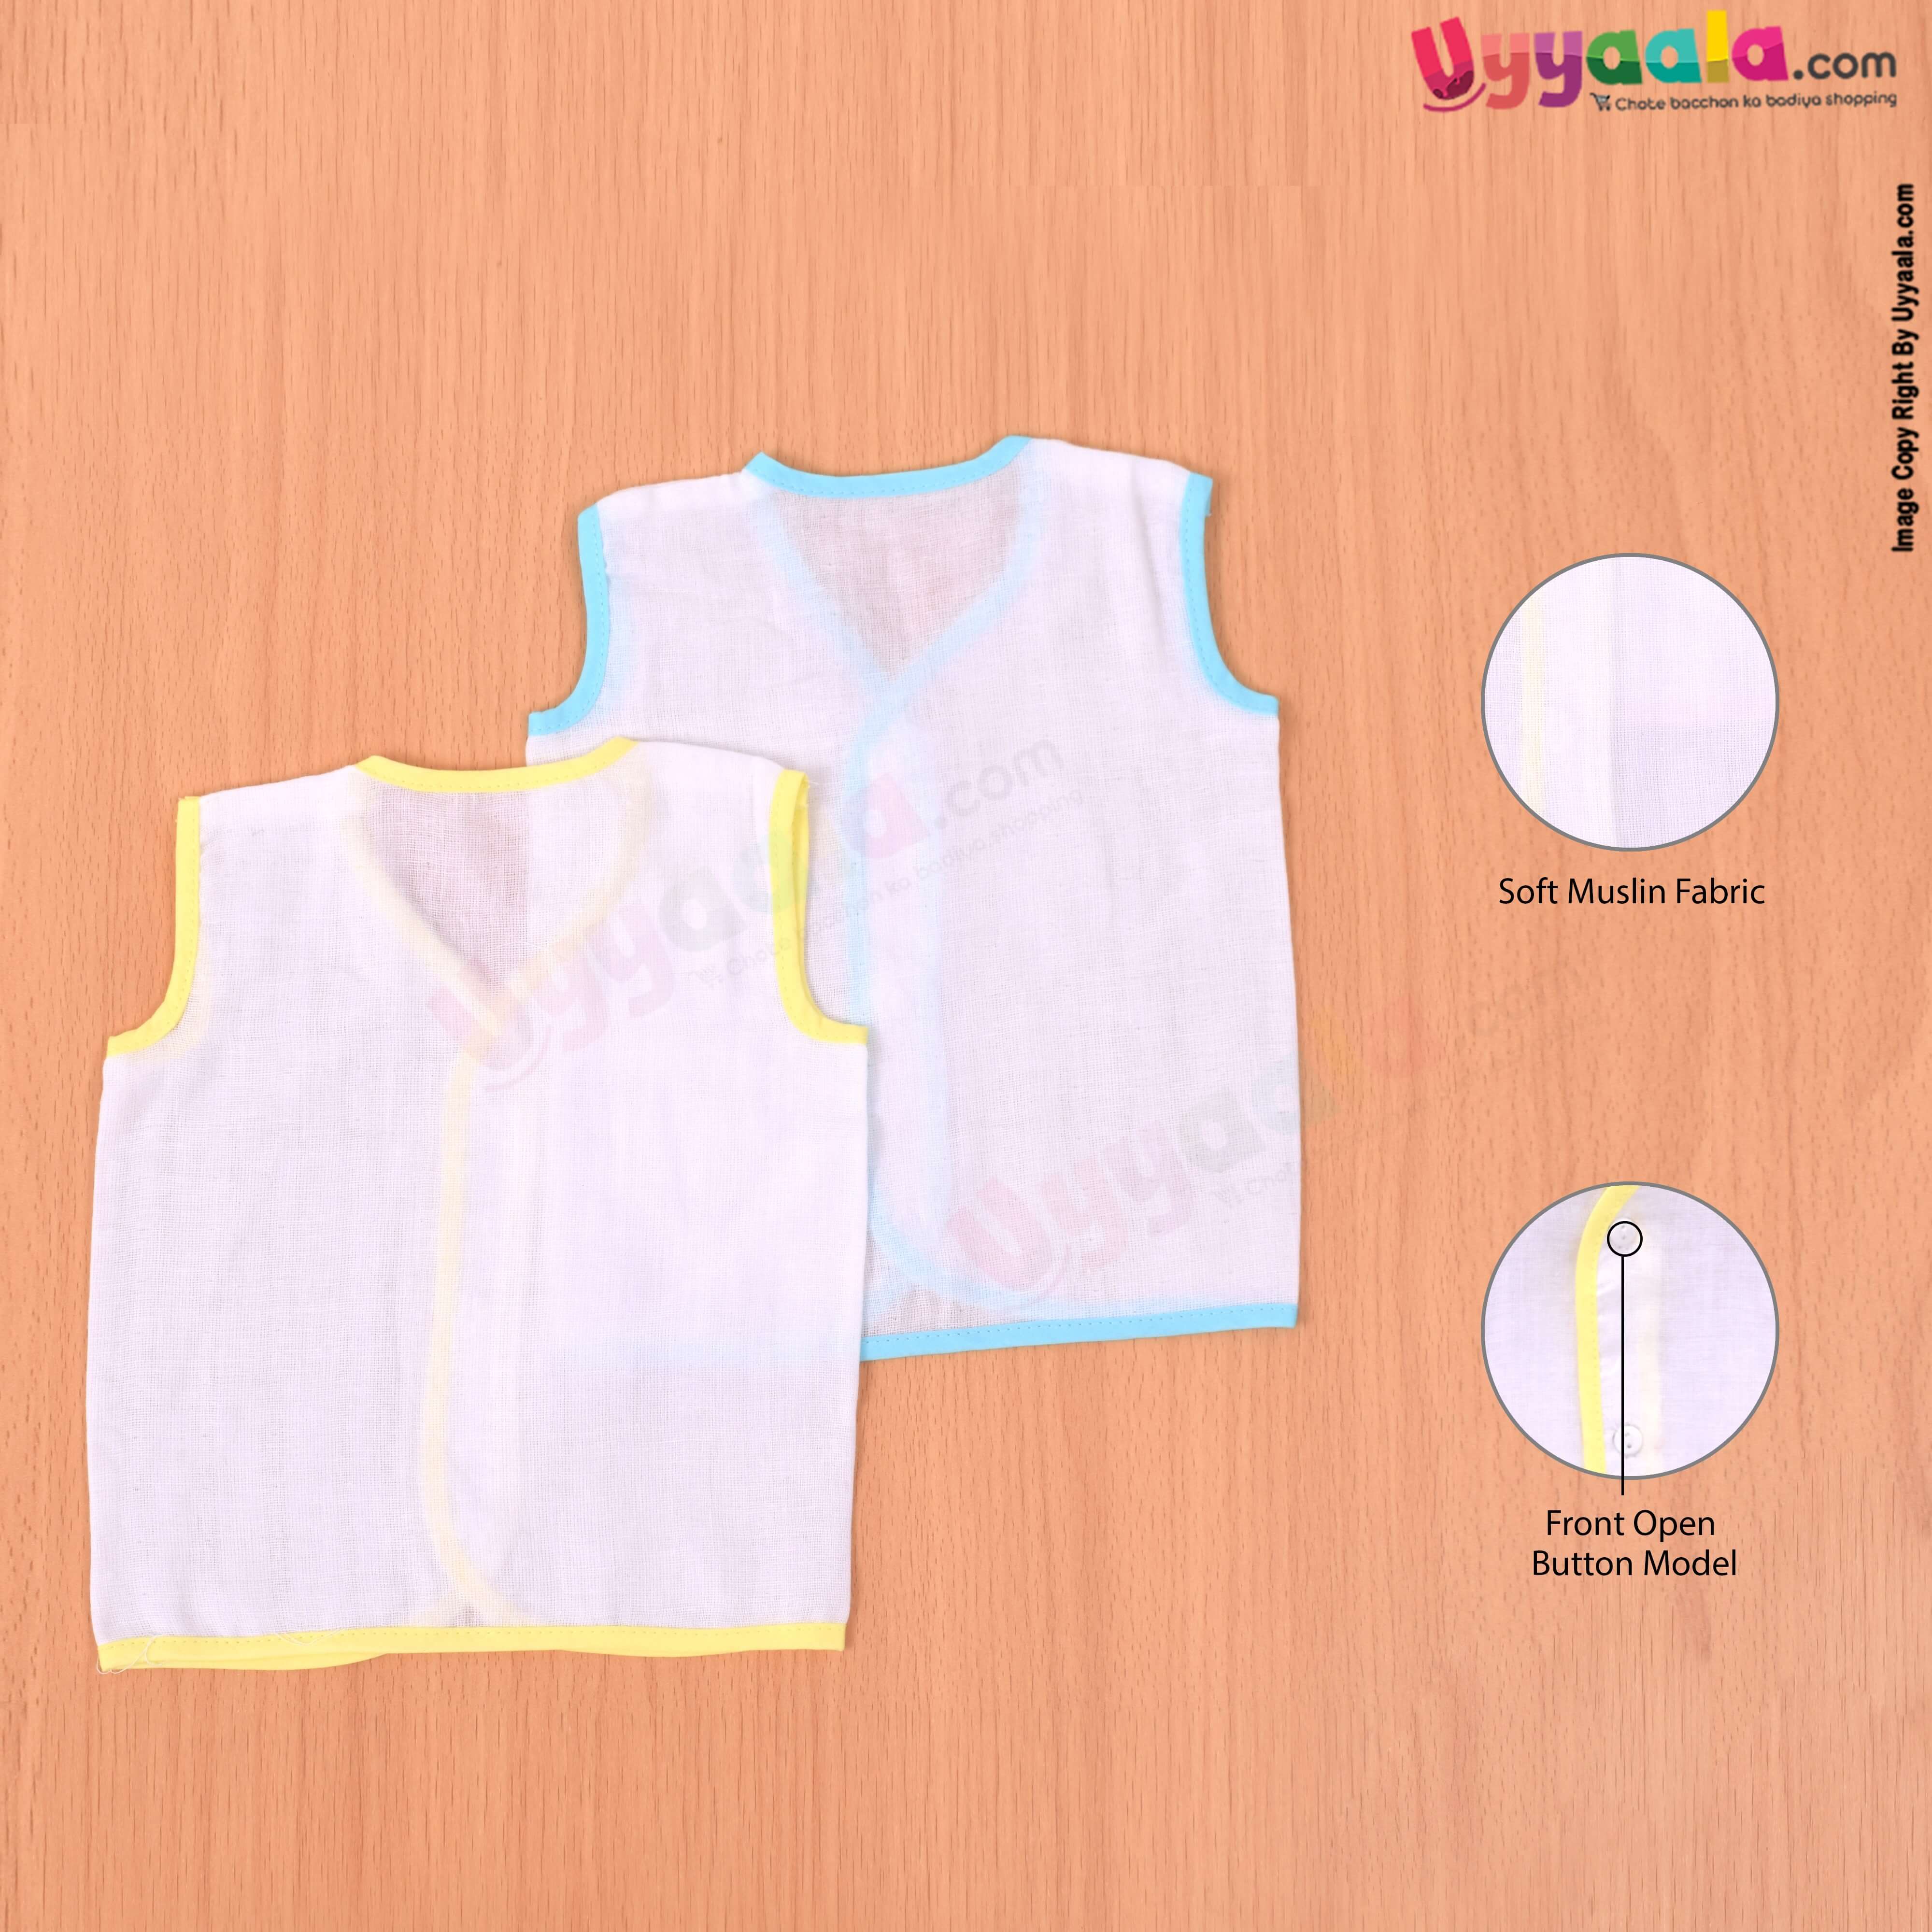 POLAR CUBS Sleeveless Baby Jabla Set, Front Opening Button Model, Premium Quality Muslin Cotton Baby Wear, 2 Pack - White with Yellow & Blue Borders